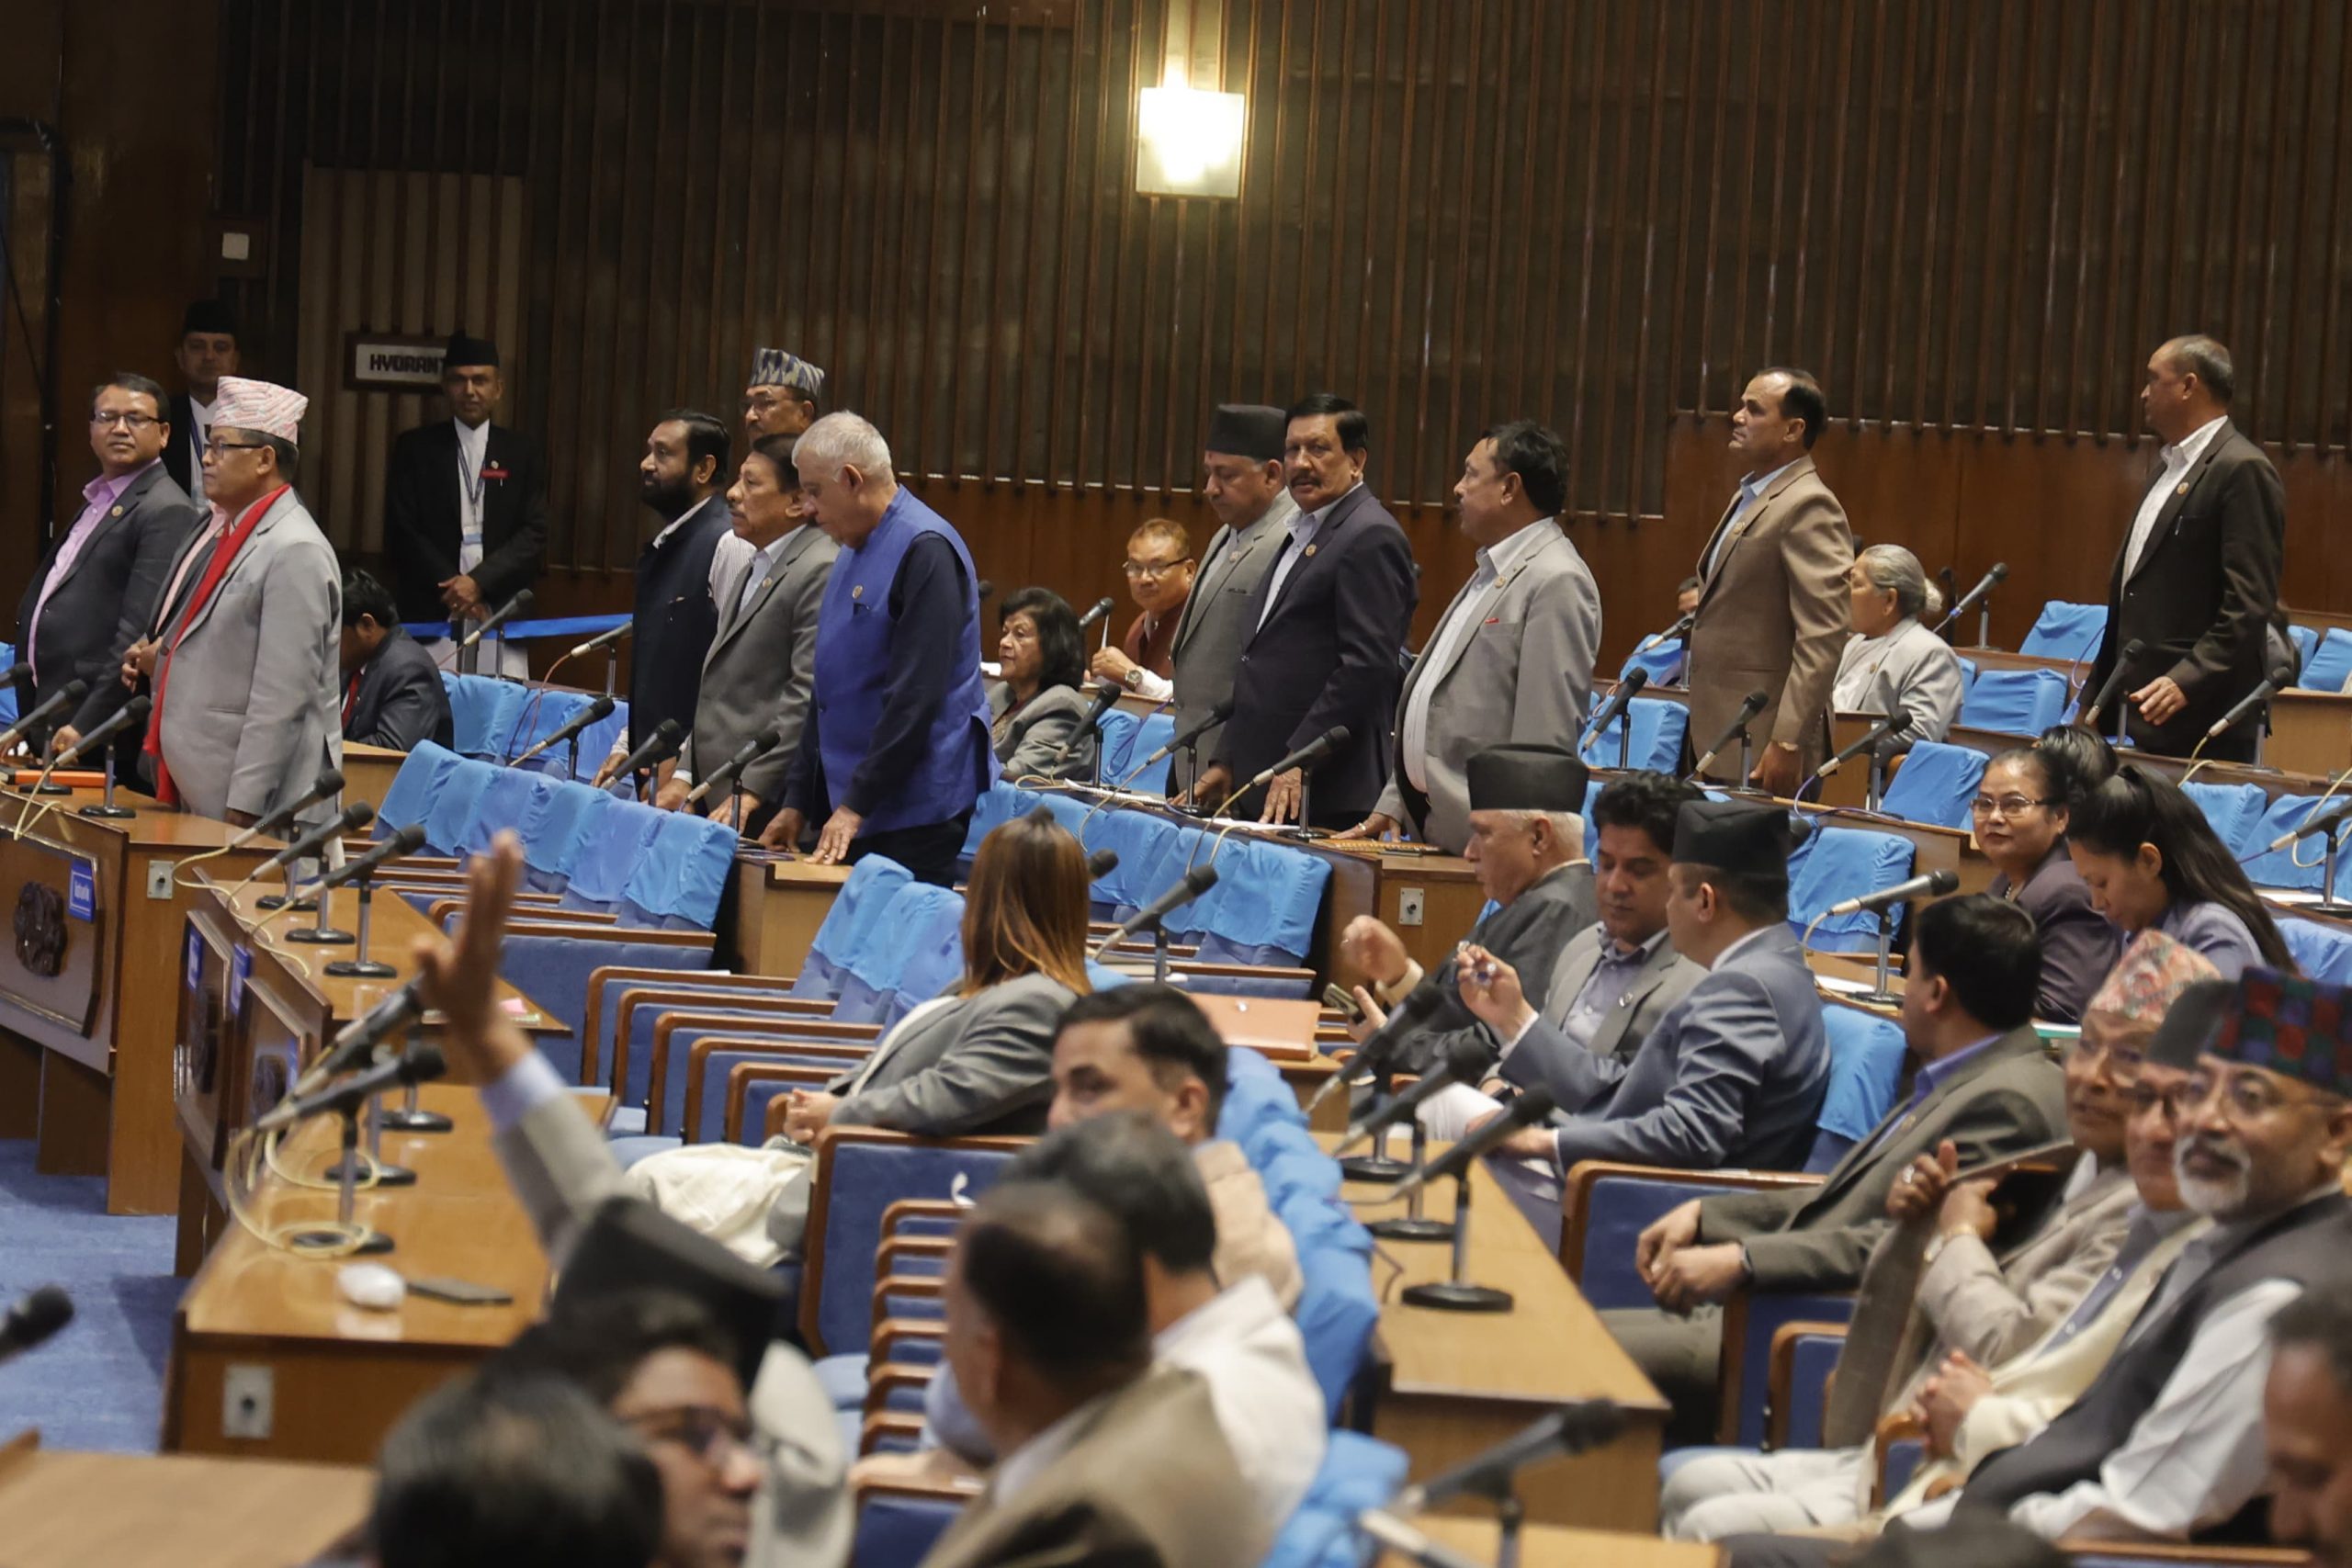 HoR meeting being held today